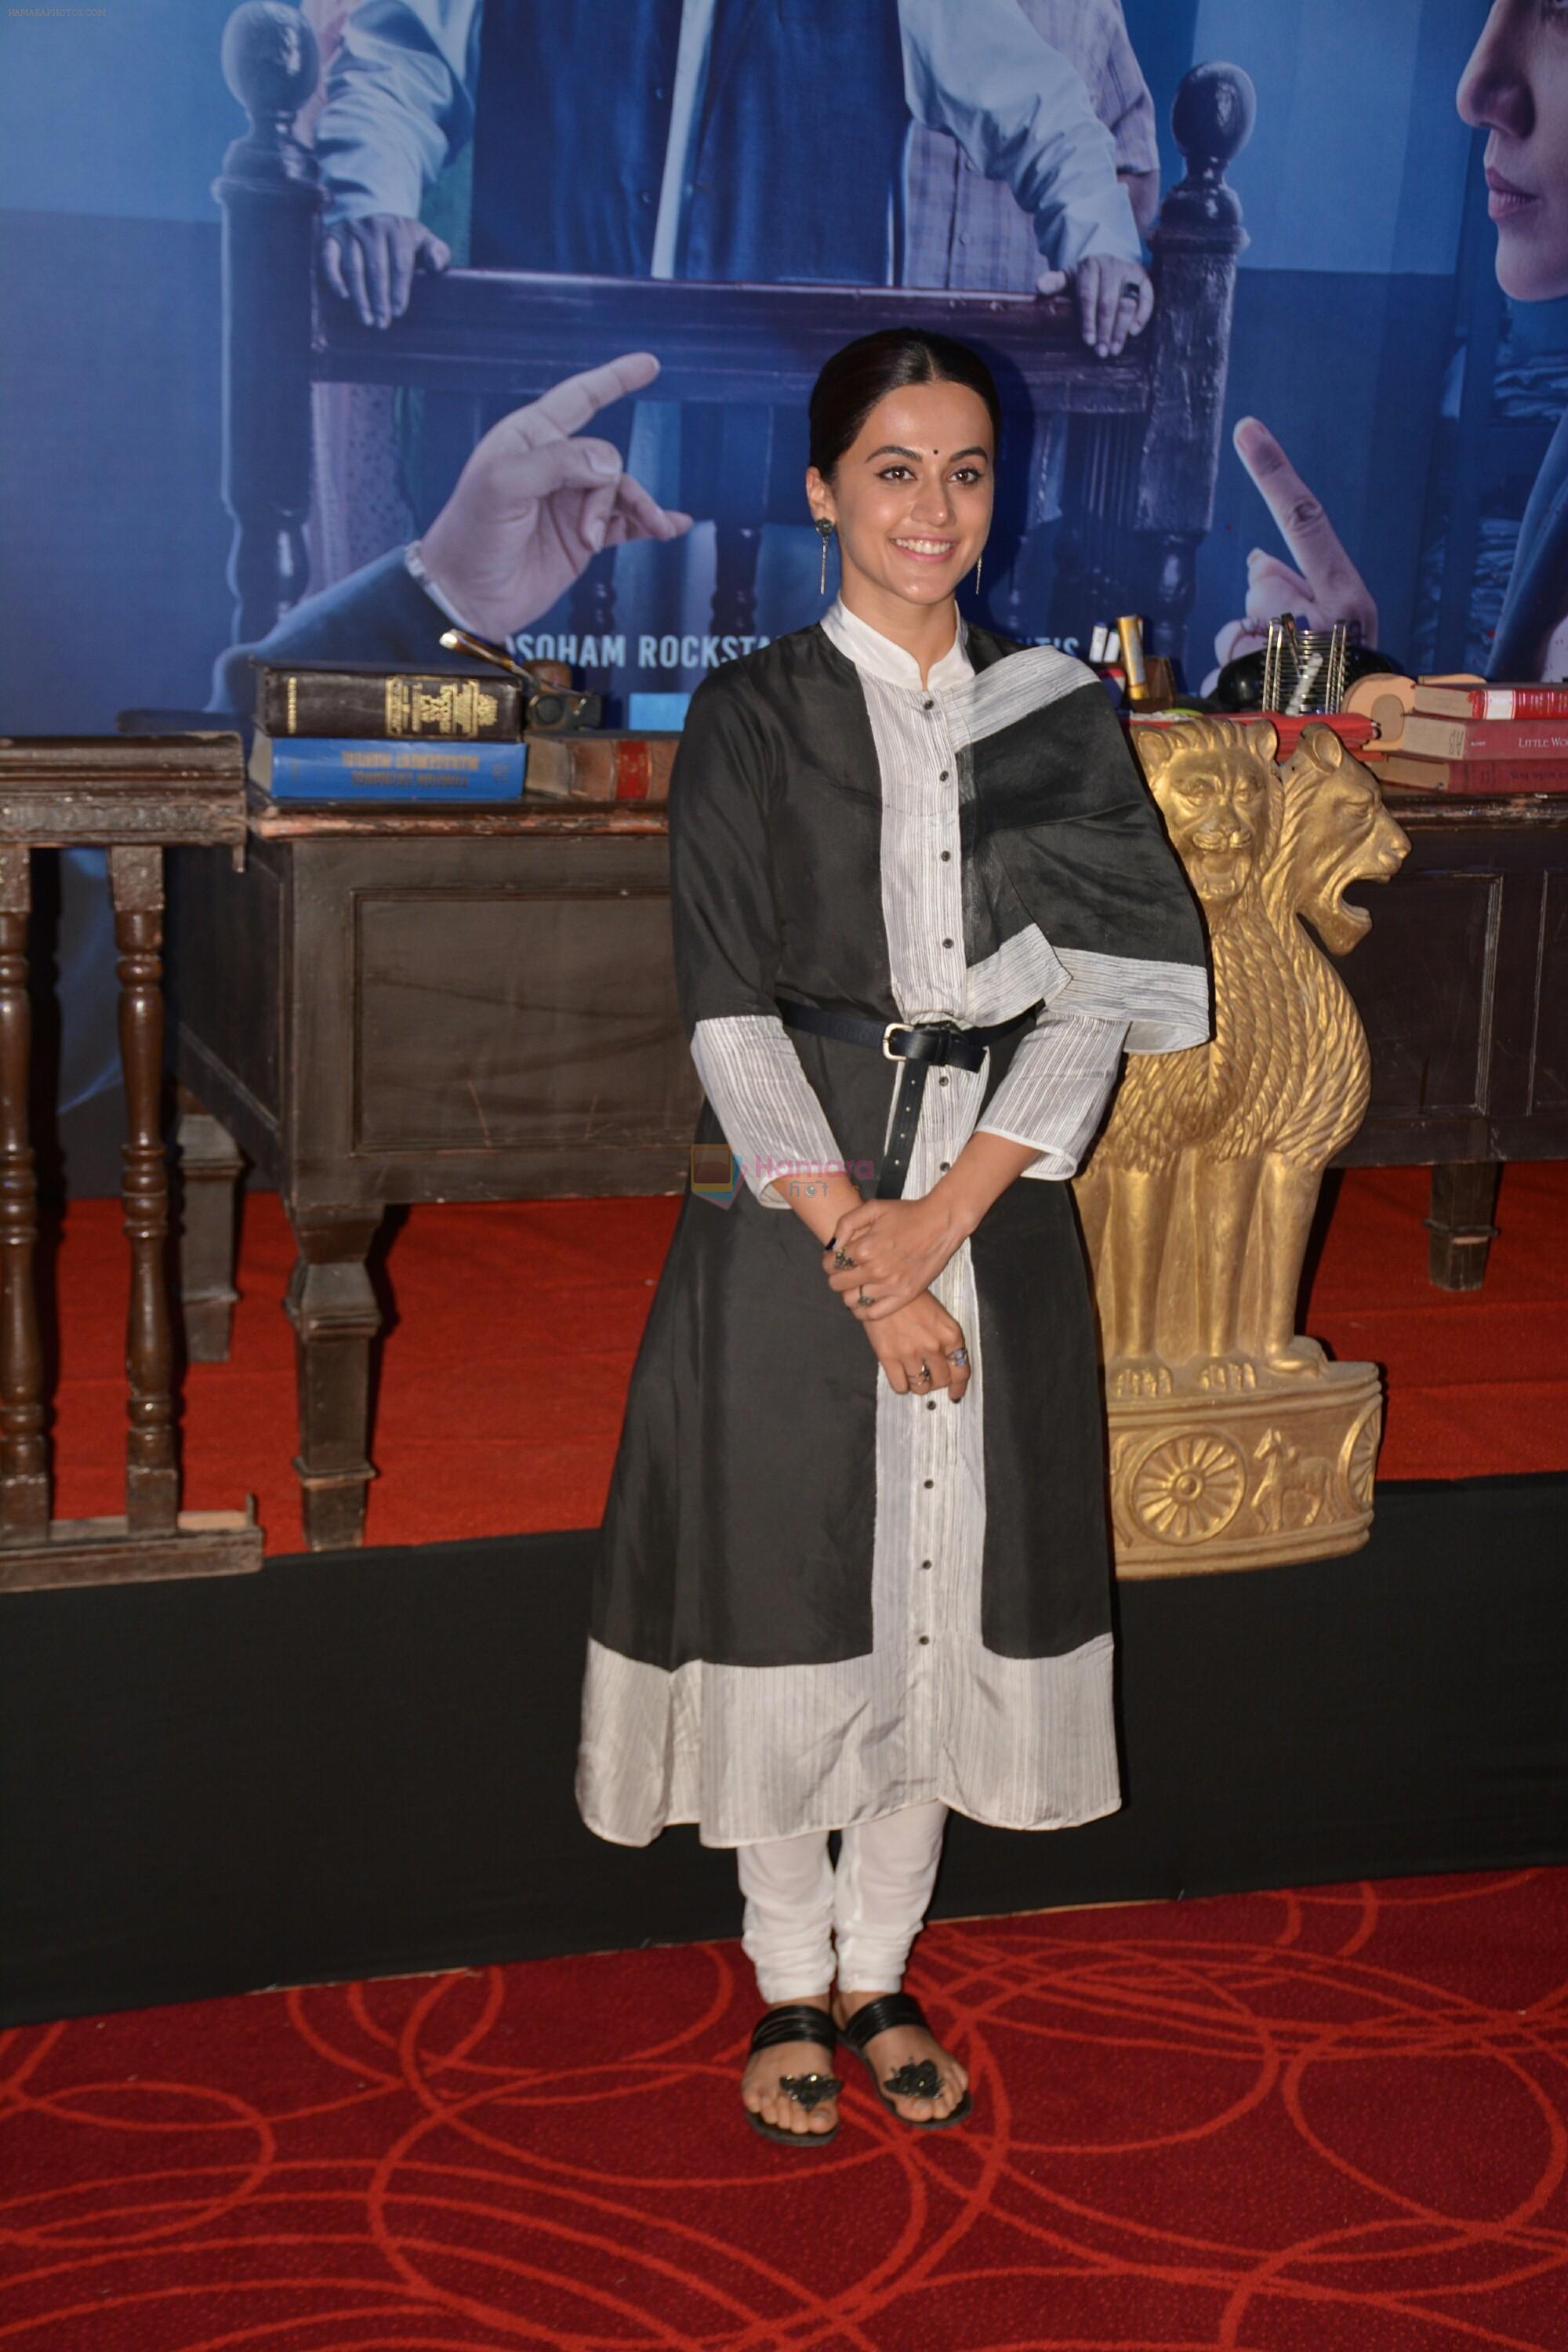 Taapsee Pannu at the Trailer launch of film Mulk in pvr, juhu on 9th July 2018